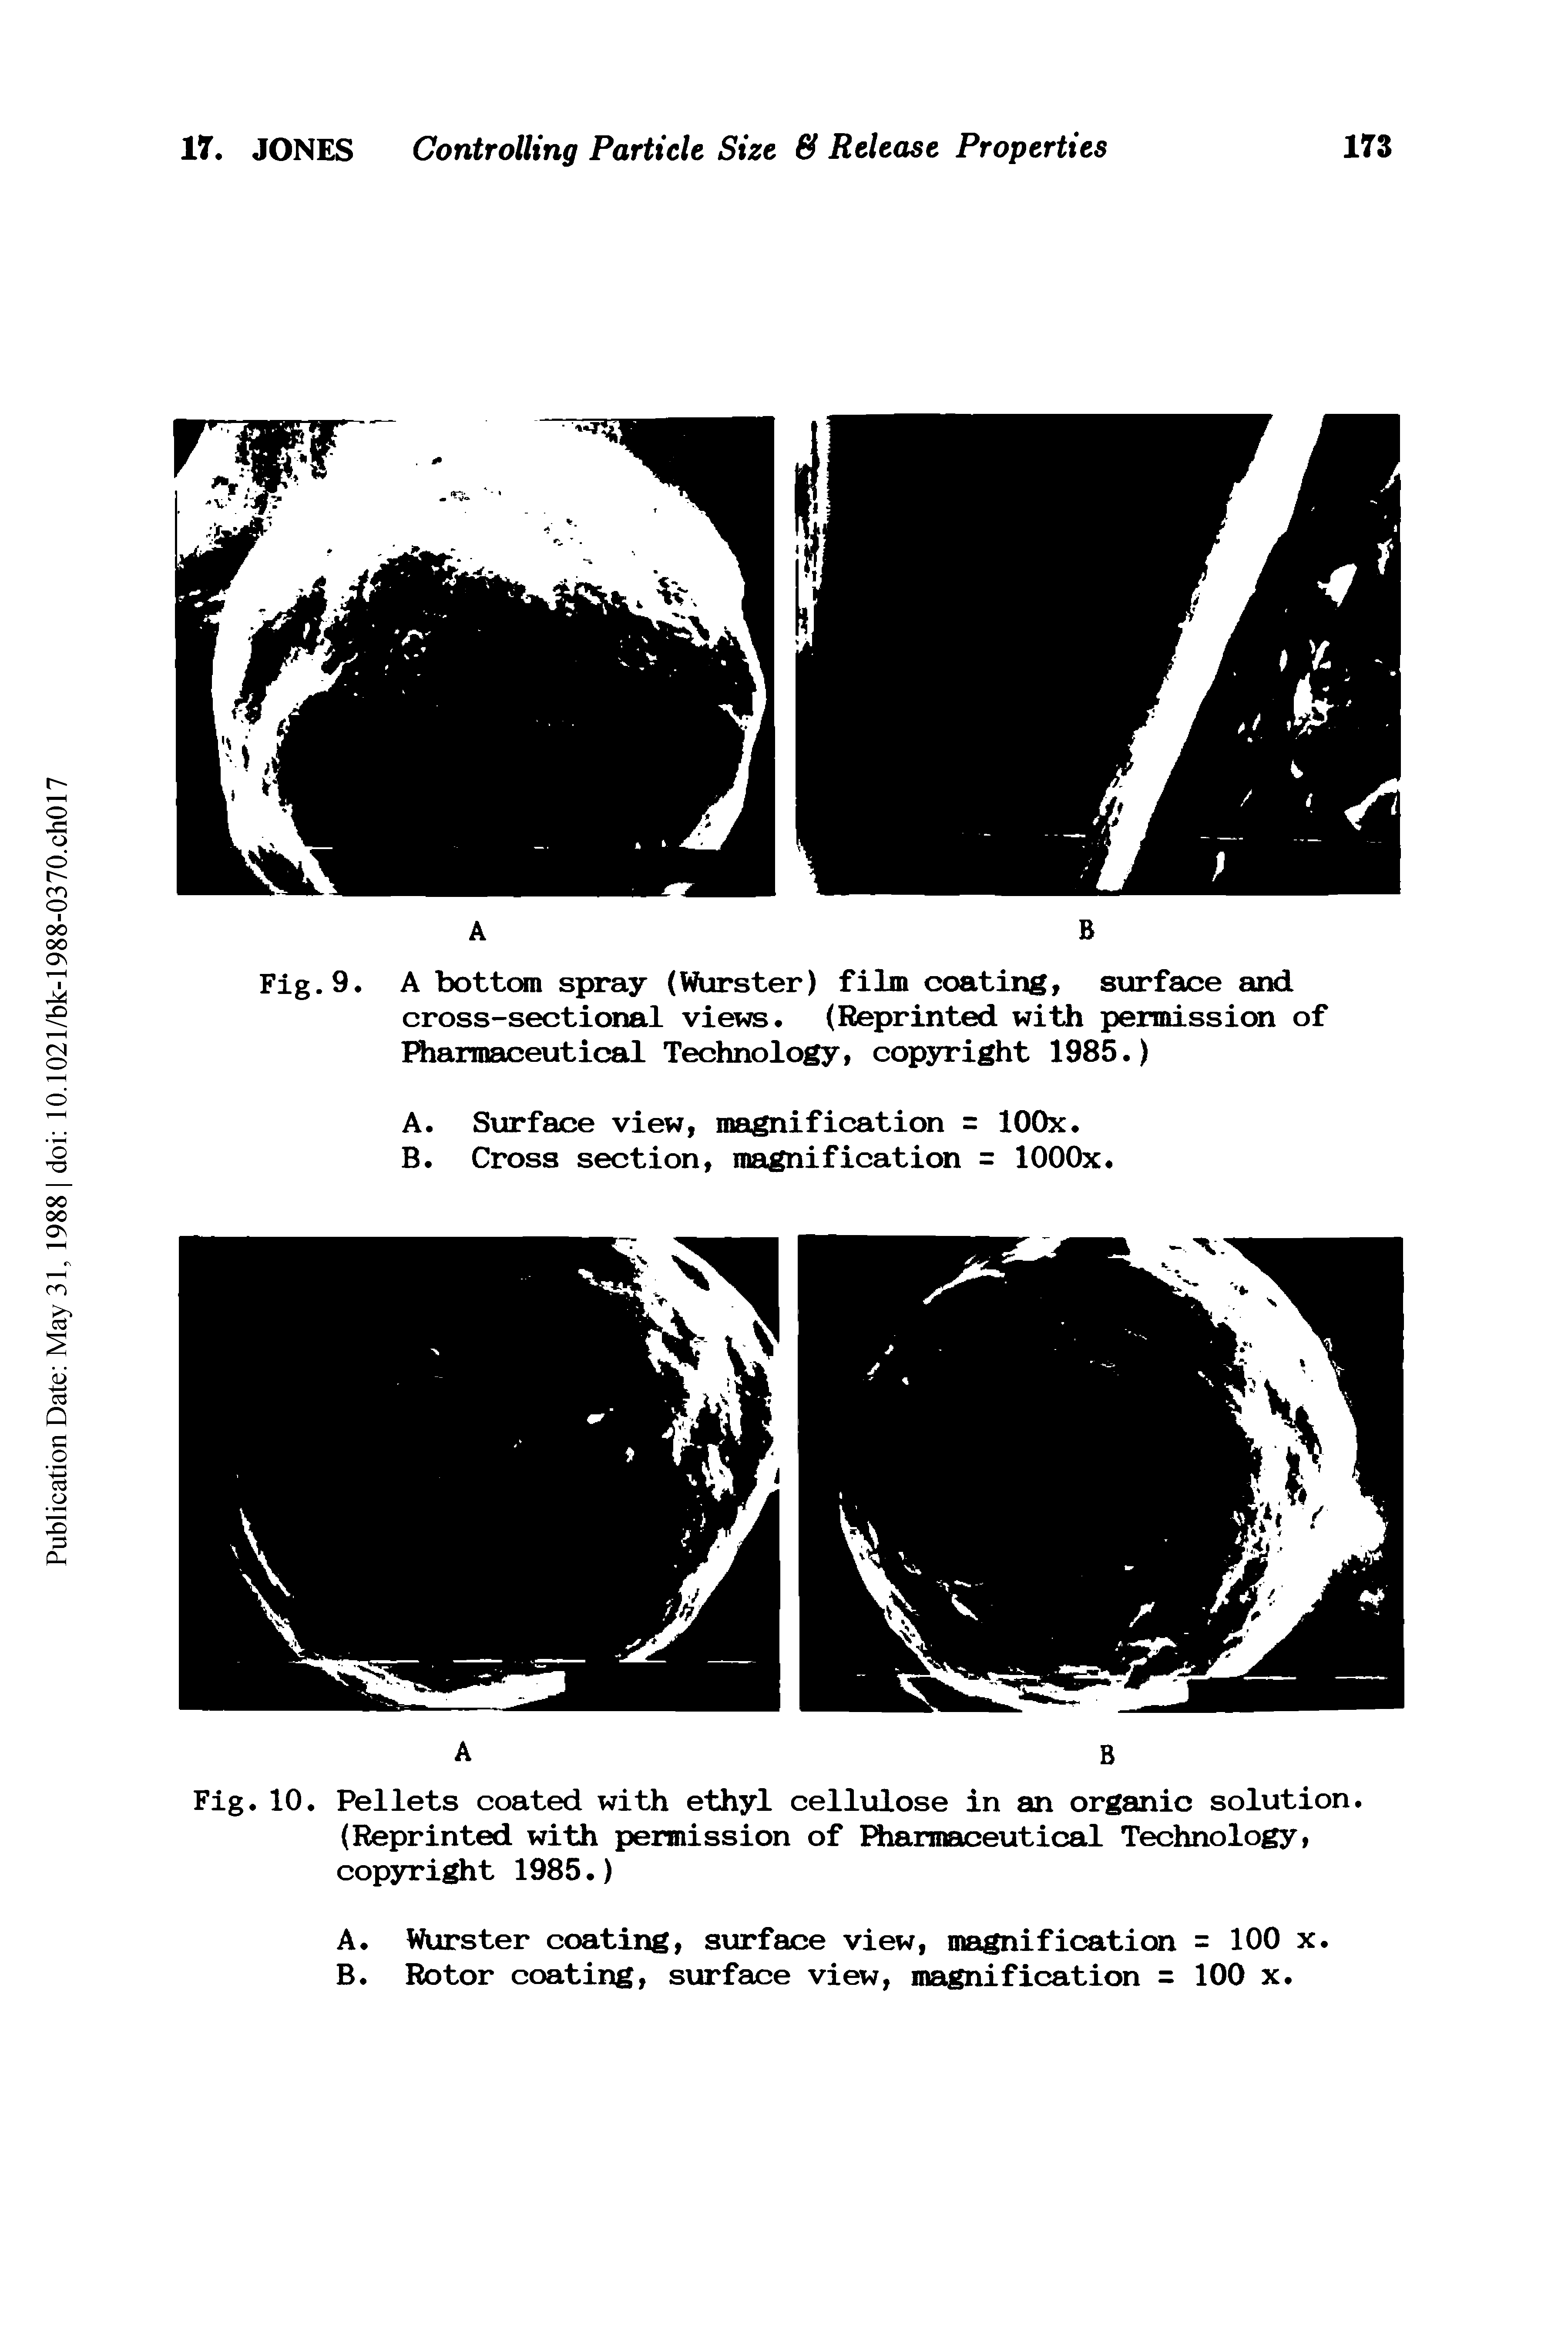 Fig. 10. Pellets coated with ethyl cellulose in an organic solution. (Reprinted with permission of Pharmaceutical Technology, copyright 1985.)...